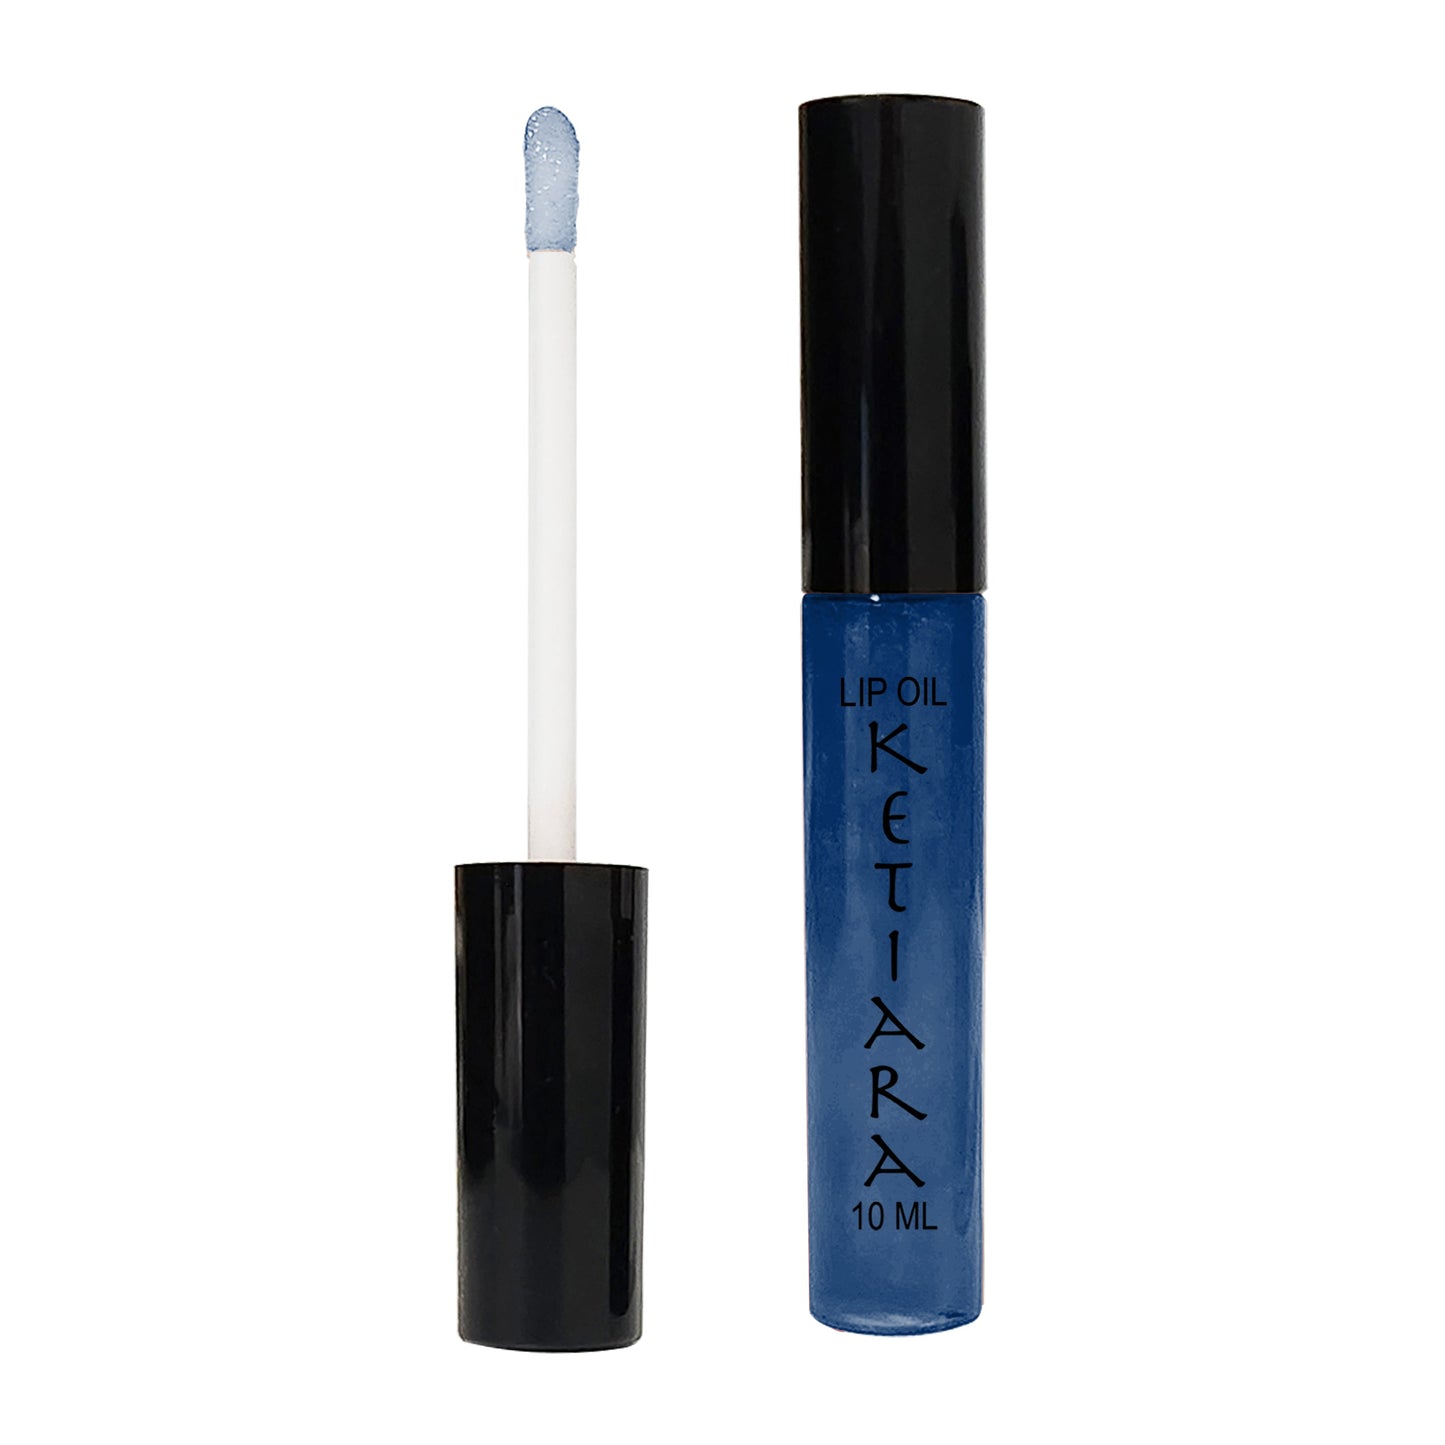 Berkeley Blue Hydrating And Conditioning Non-sticky Premium Sheer Lip Oil Infused With Hyaluronic Acid